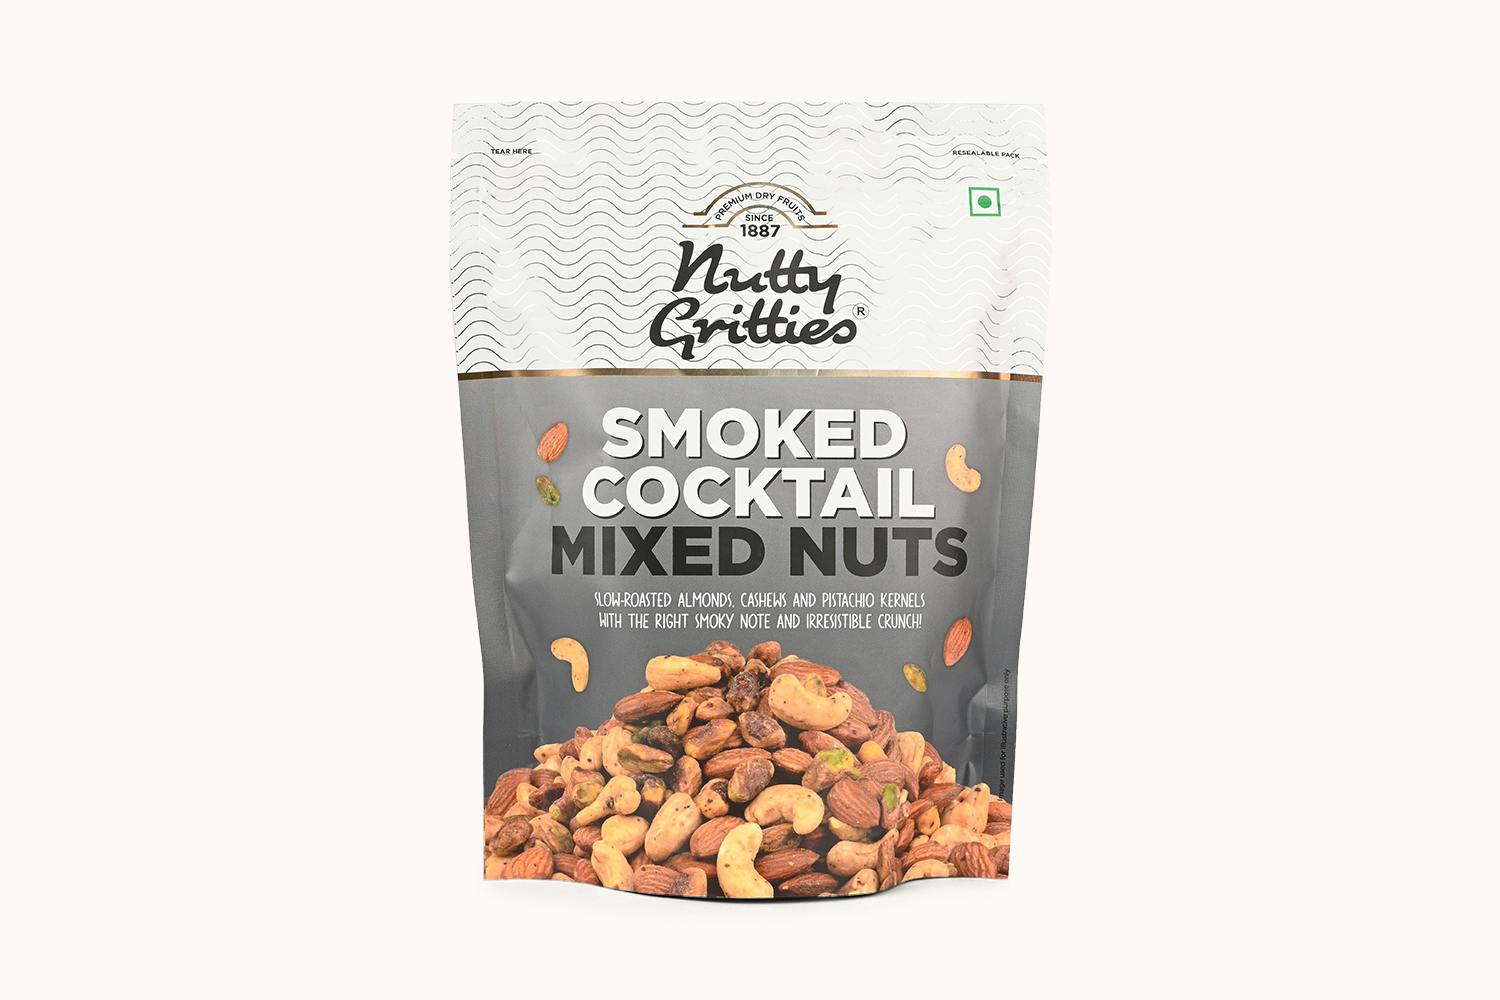 Nutty Gritties Premium Smoked Cocktail Mixed Nuts